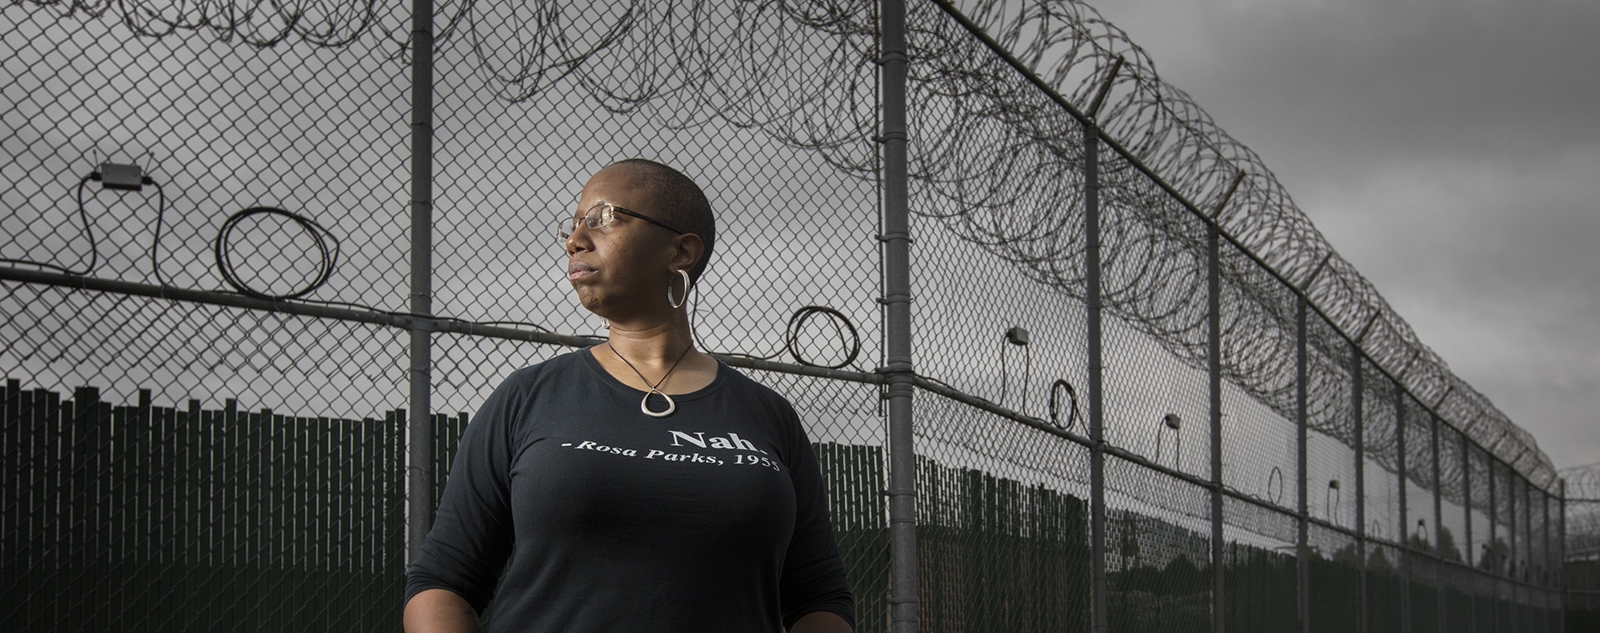 Erin Corbett ’99 stands in front of a prison